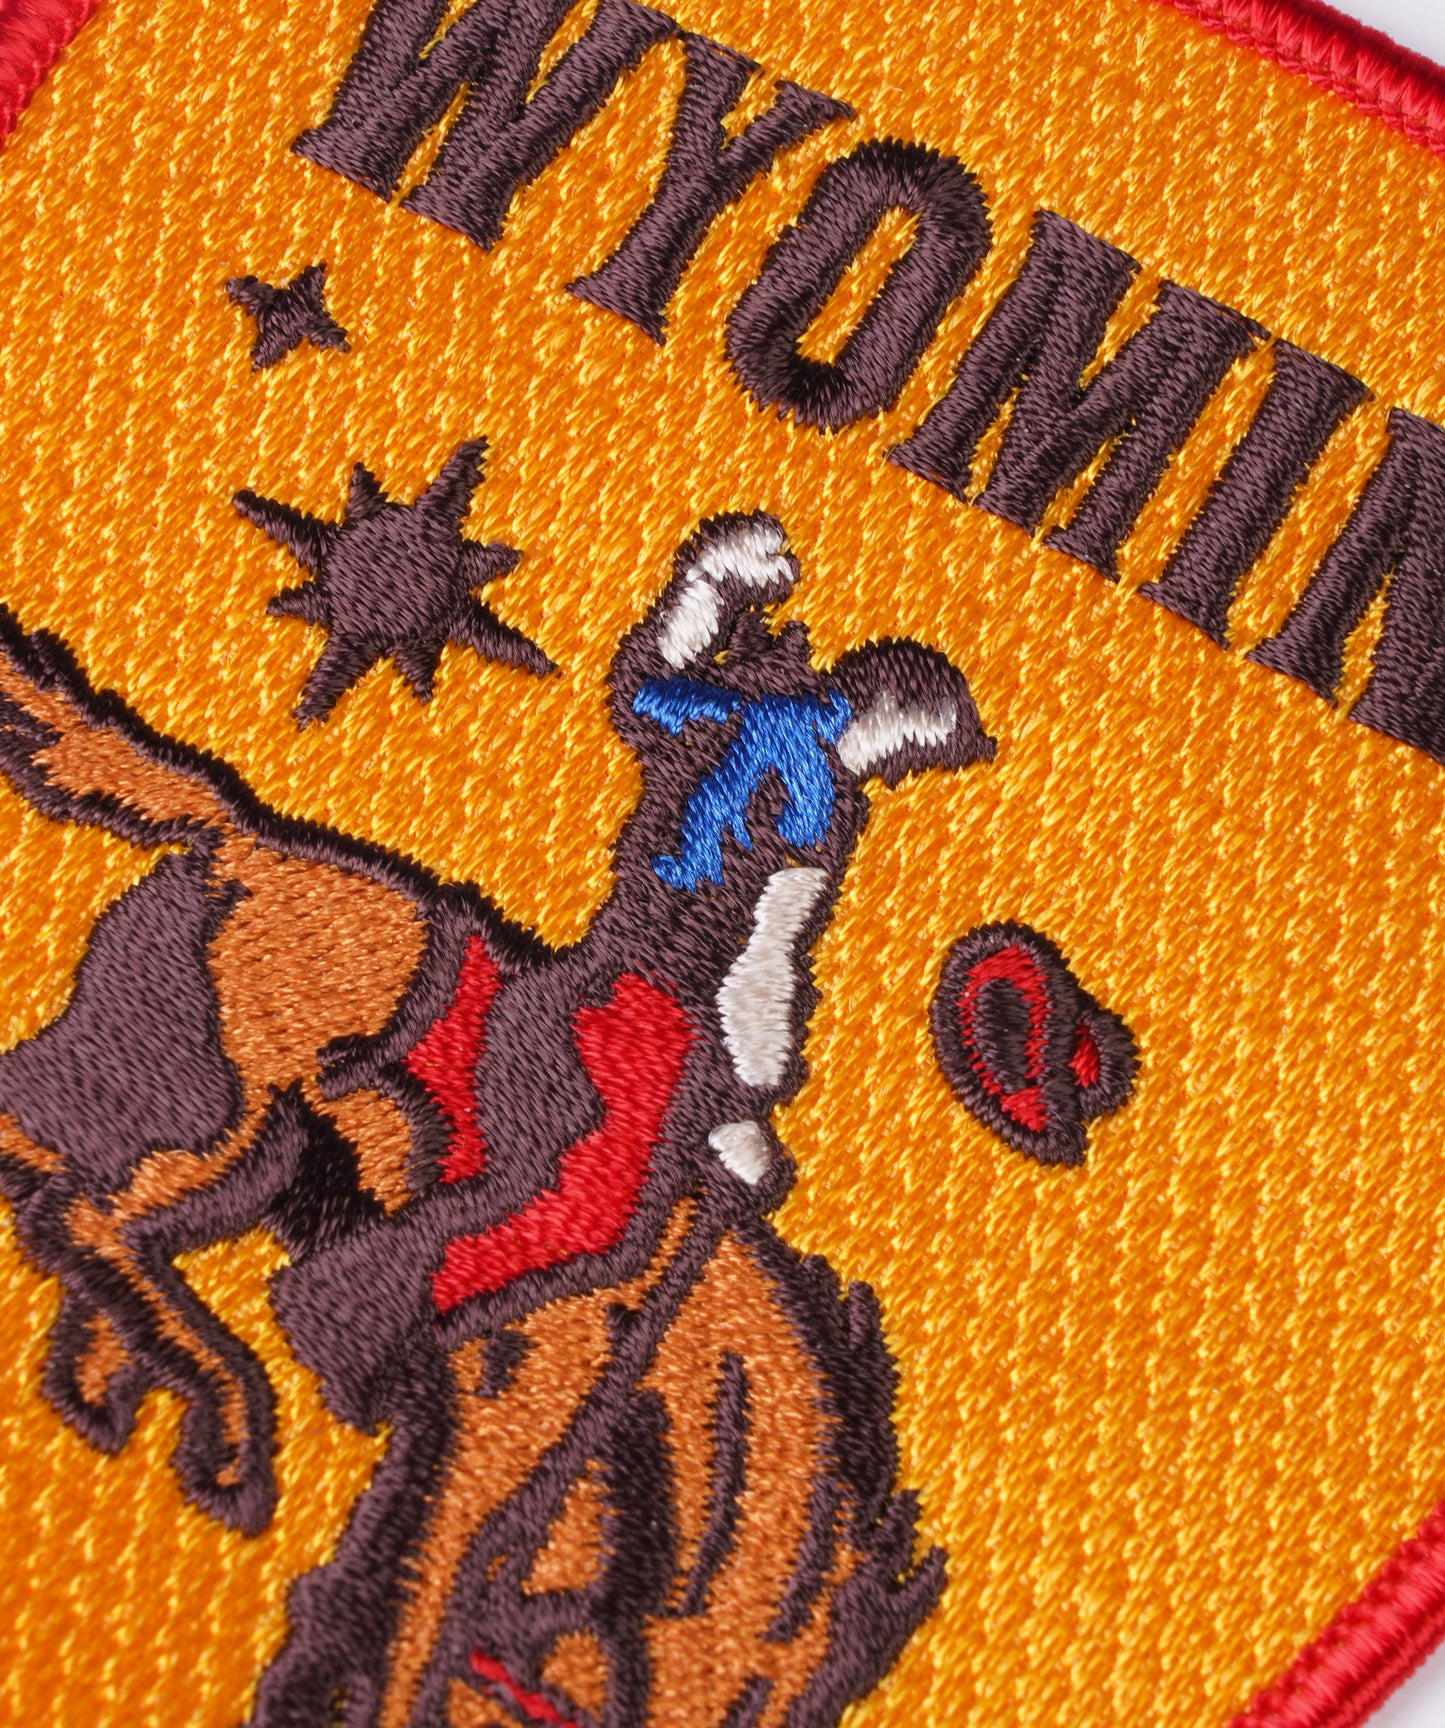 Wyoming Embroidered Patch